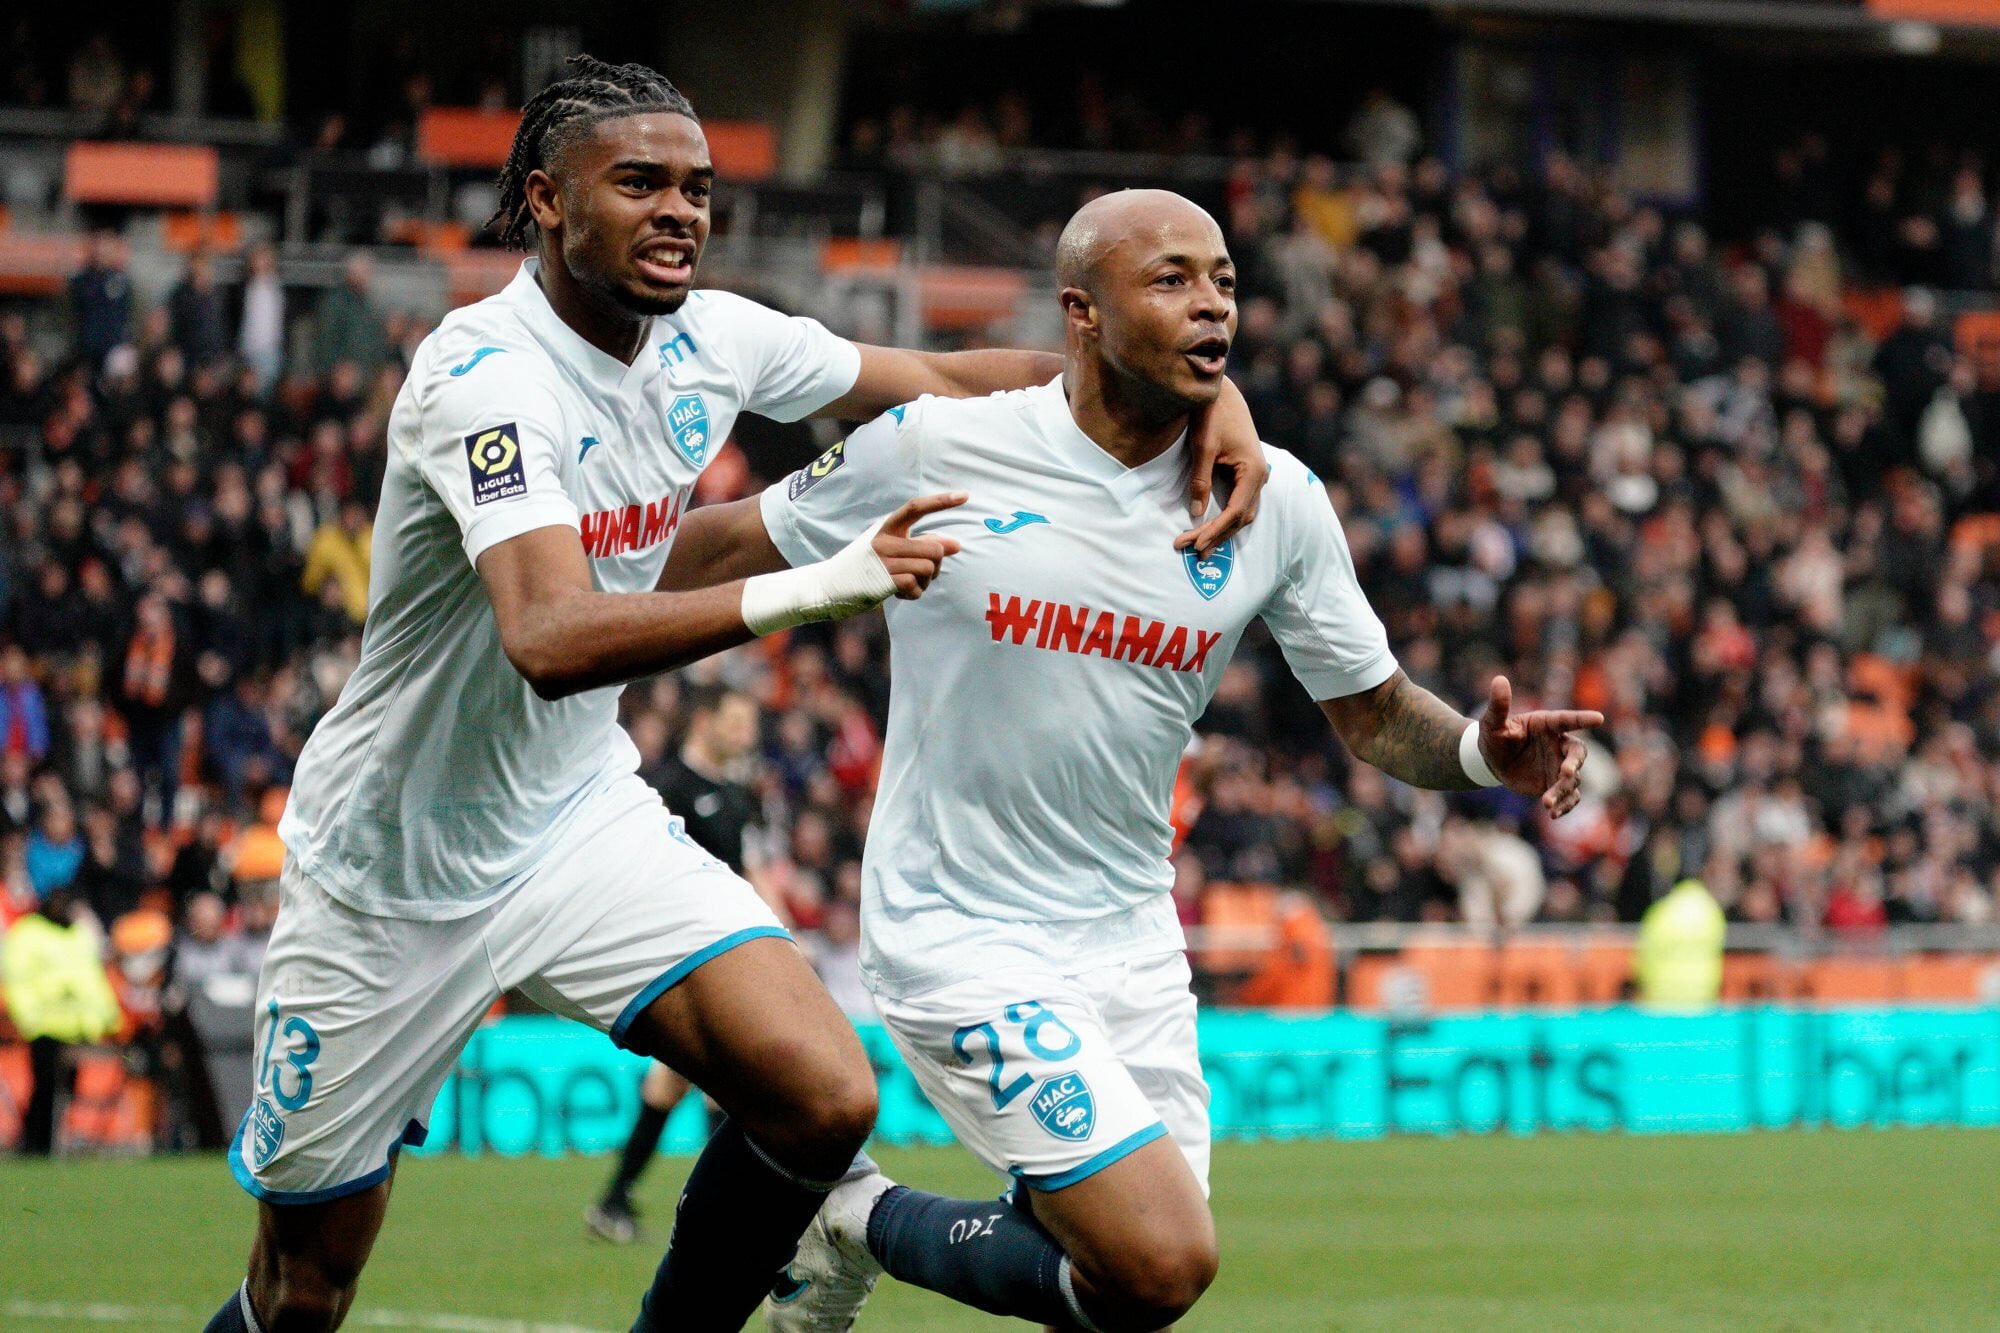 André Ayew marque son 50e but, Le Havre chute contre Clermont Foot